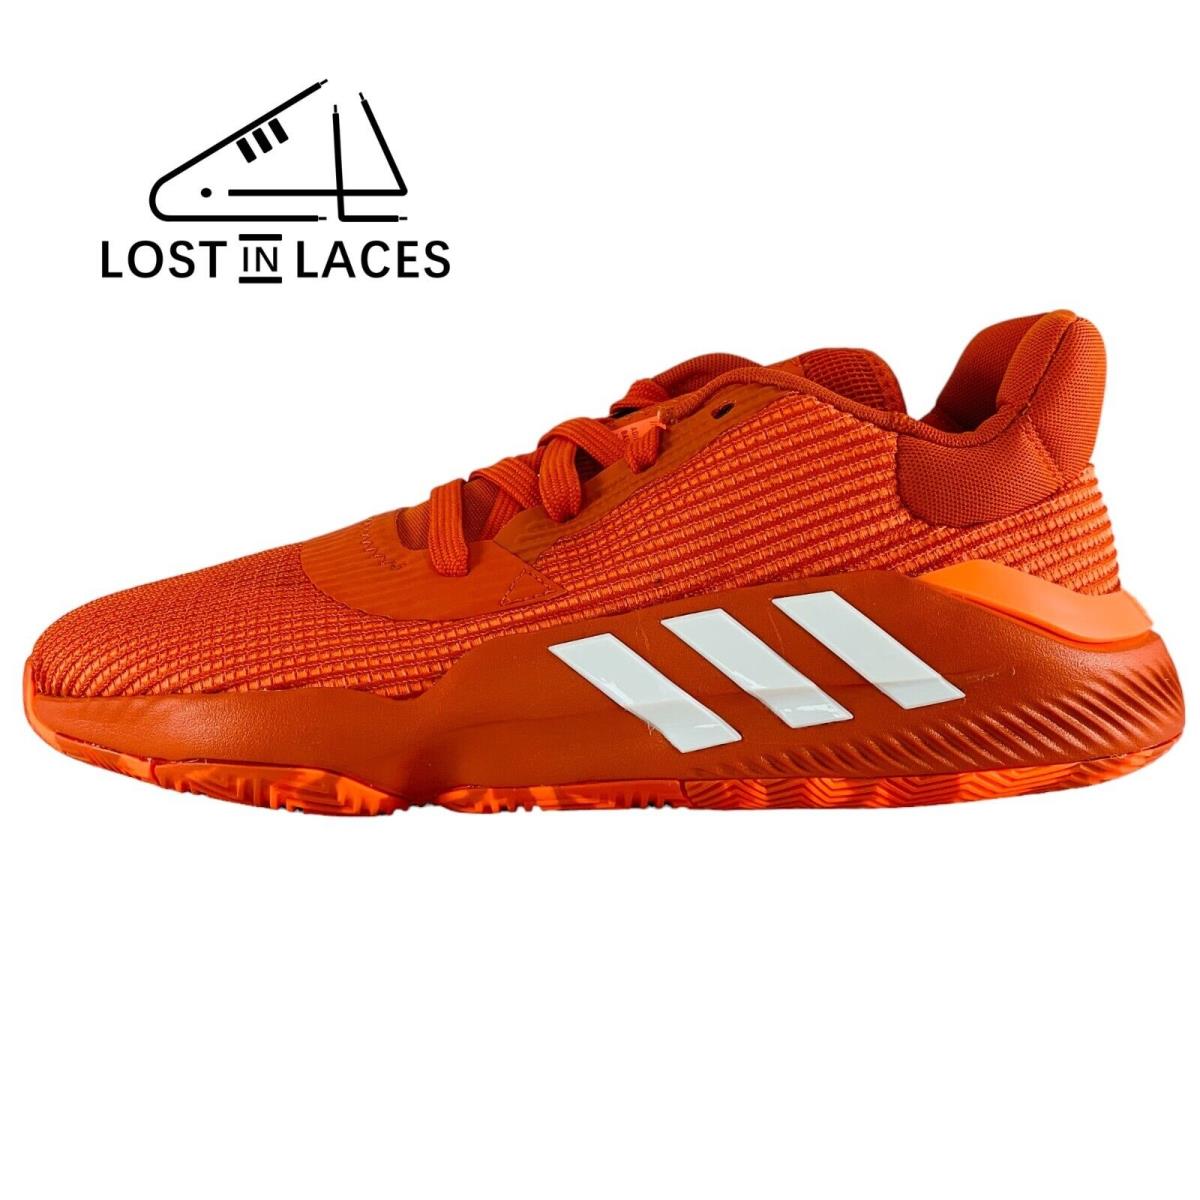 Adidas Pro Bounce 2019 Low Solar Red White Basketball Shoes Men`s Sizes